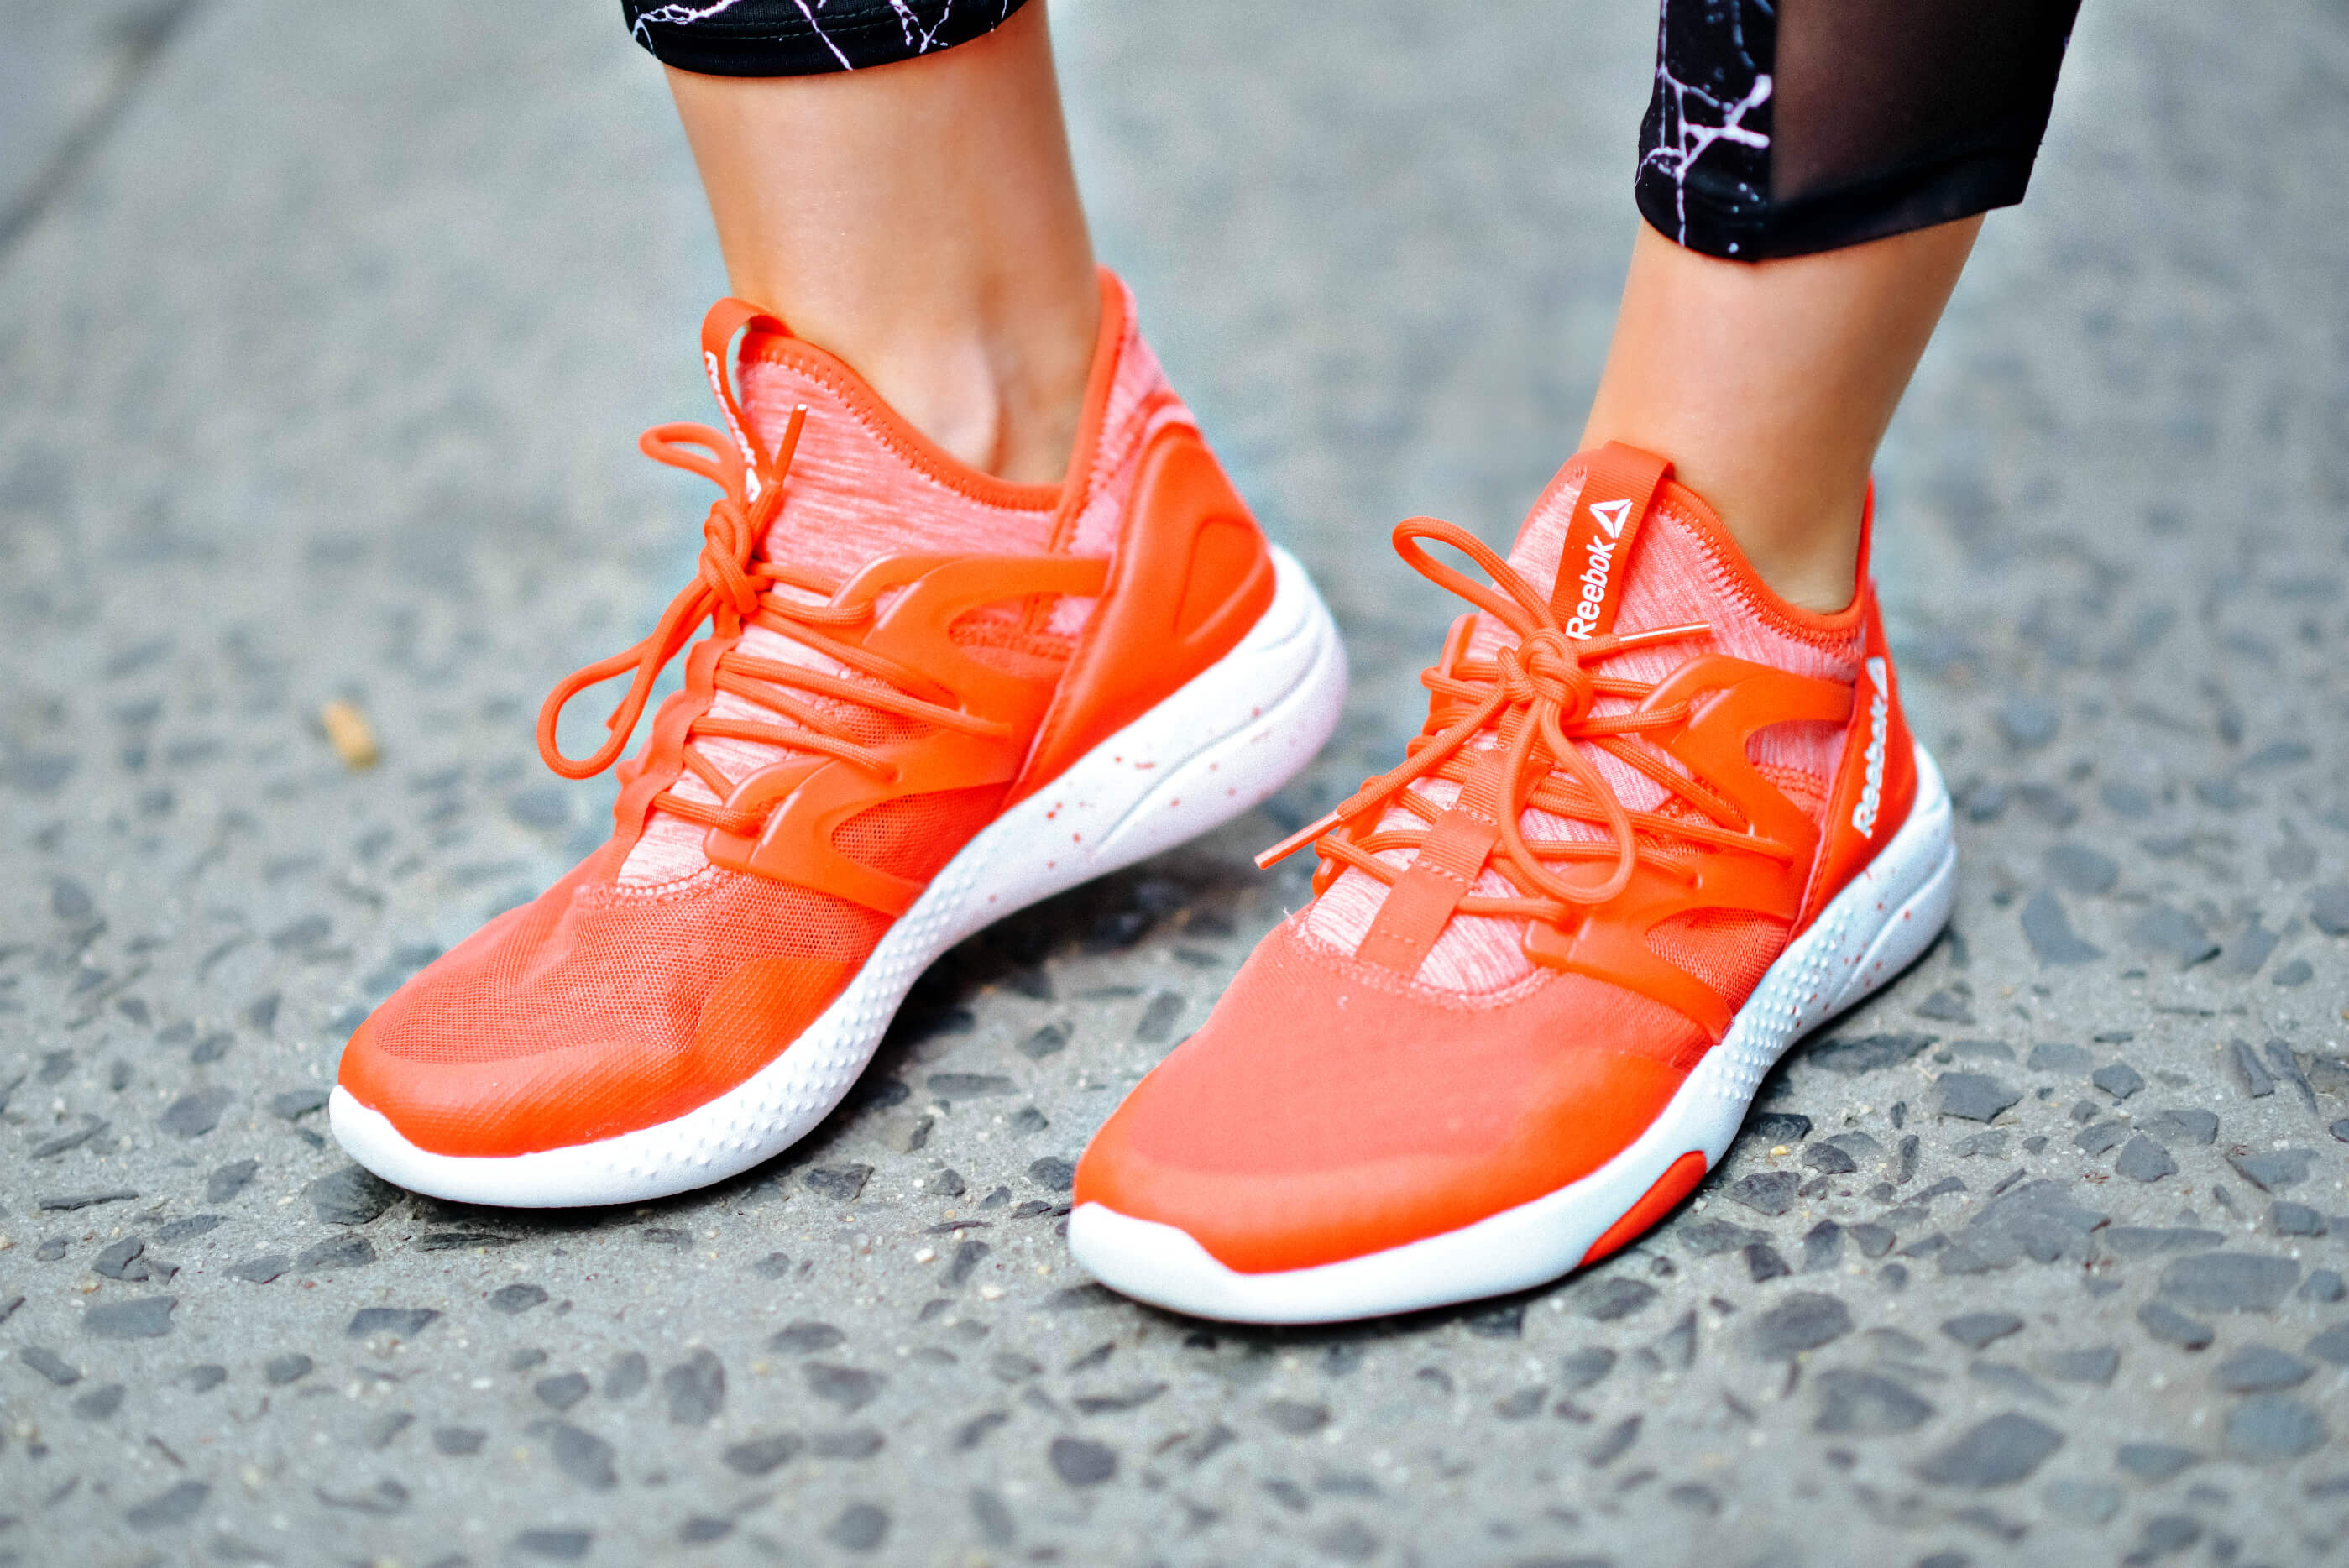 Reebok Red Sneakers, Tilden of To Be Bright